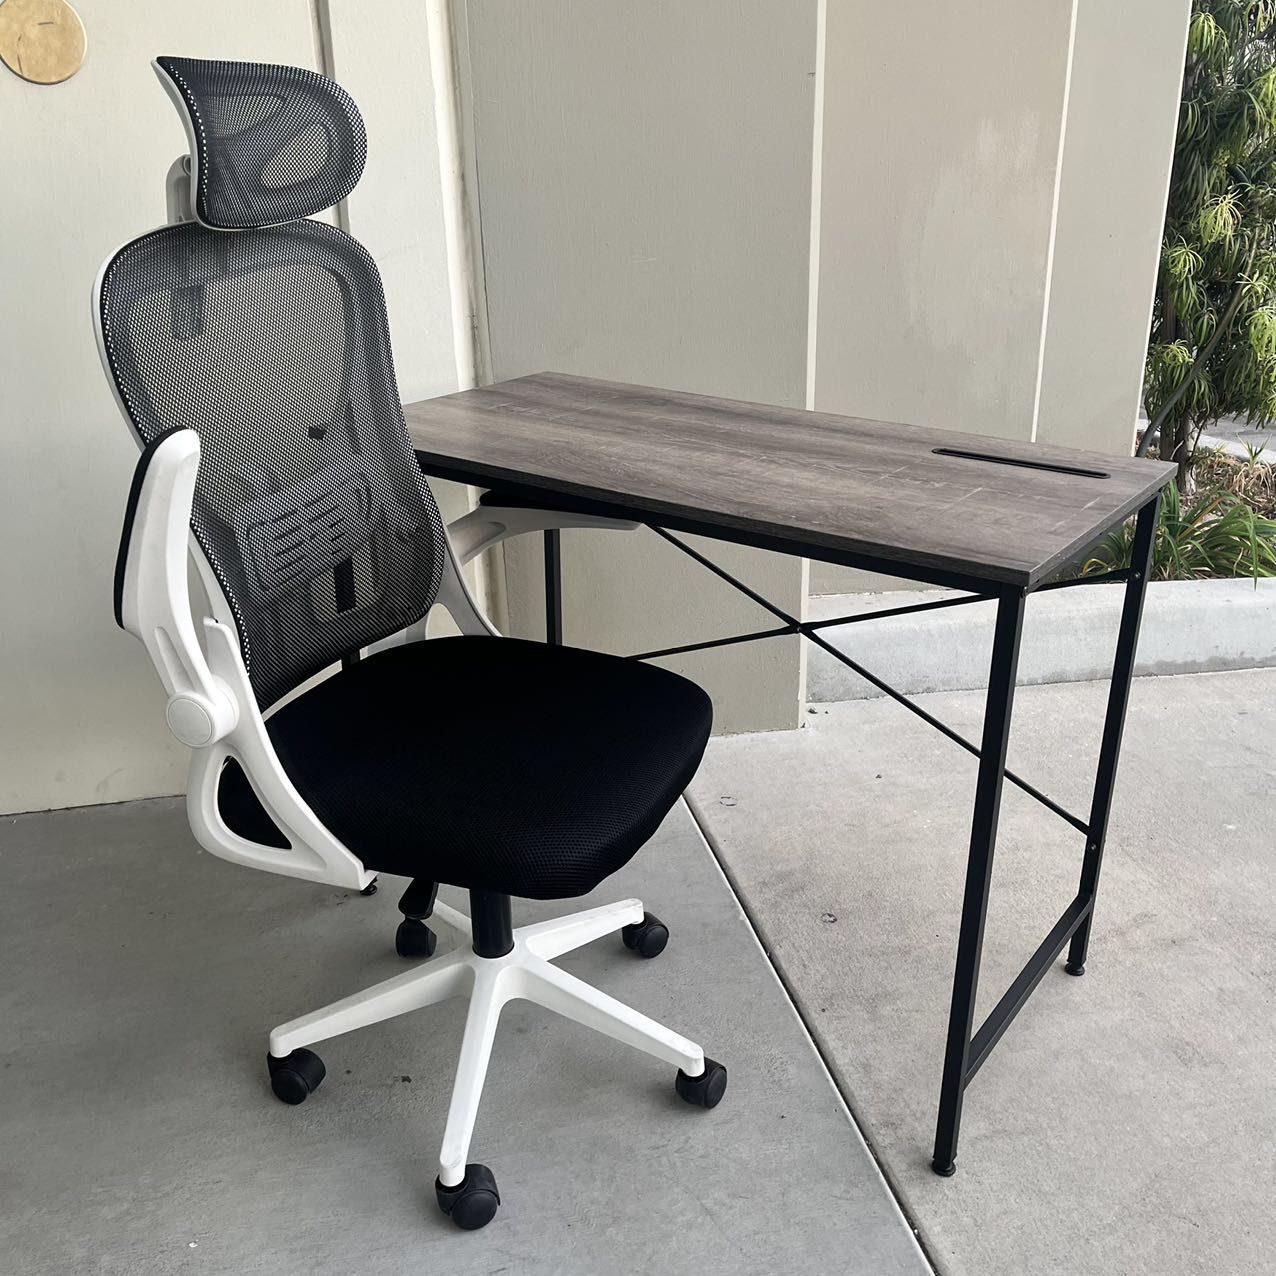 New In Box 40x20x30 Inch Tall Computer Gray Table With Office Mesh Chair Furniture Combo Set Black Or White 